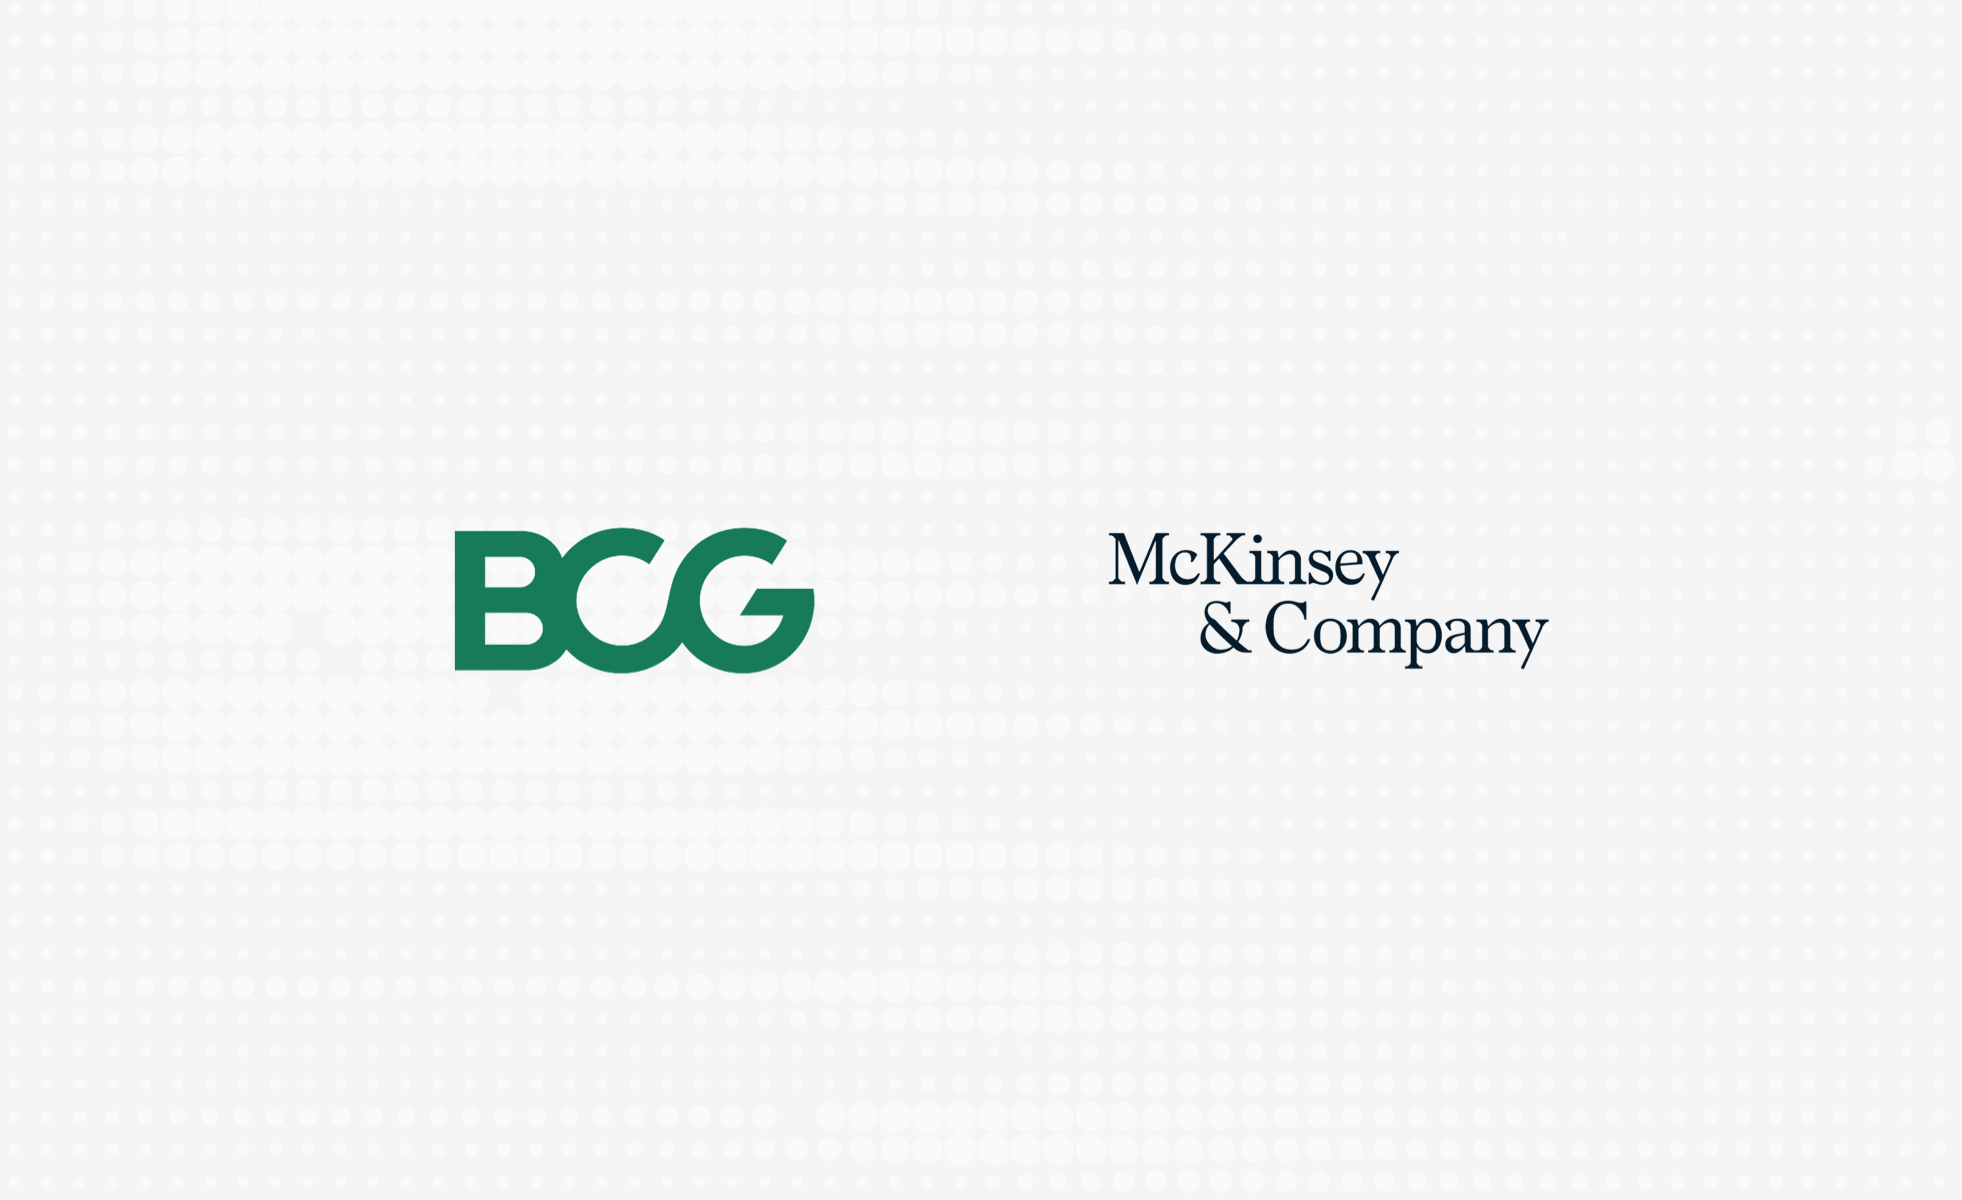 Consultancies logo graphic with BCG and McKinsey & Company logos